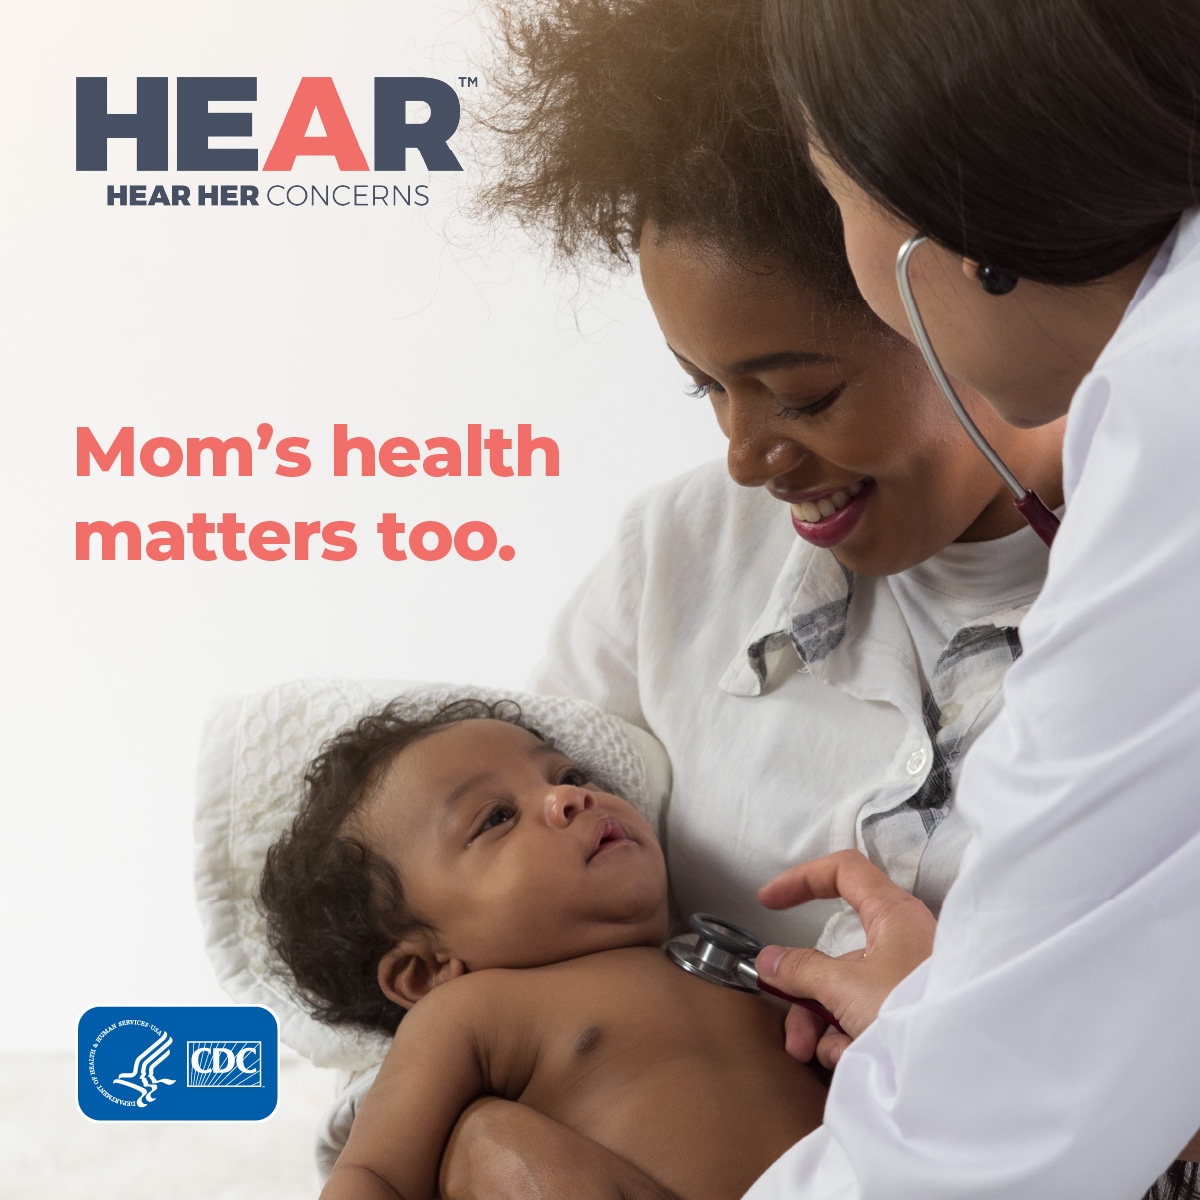 Hear Her Concerns. Mom's health matters too.